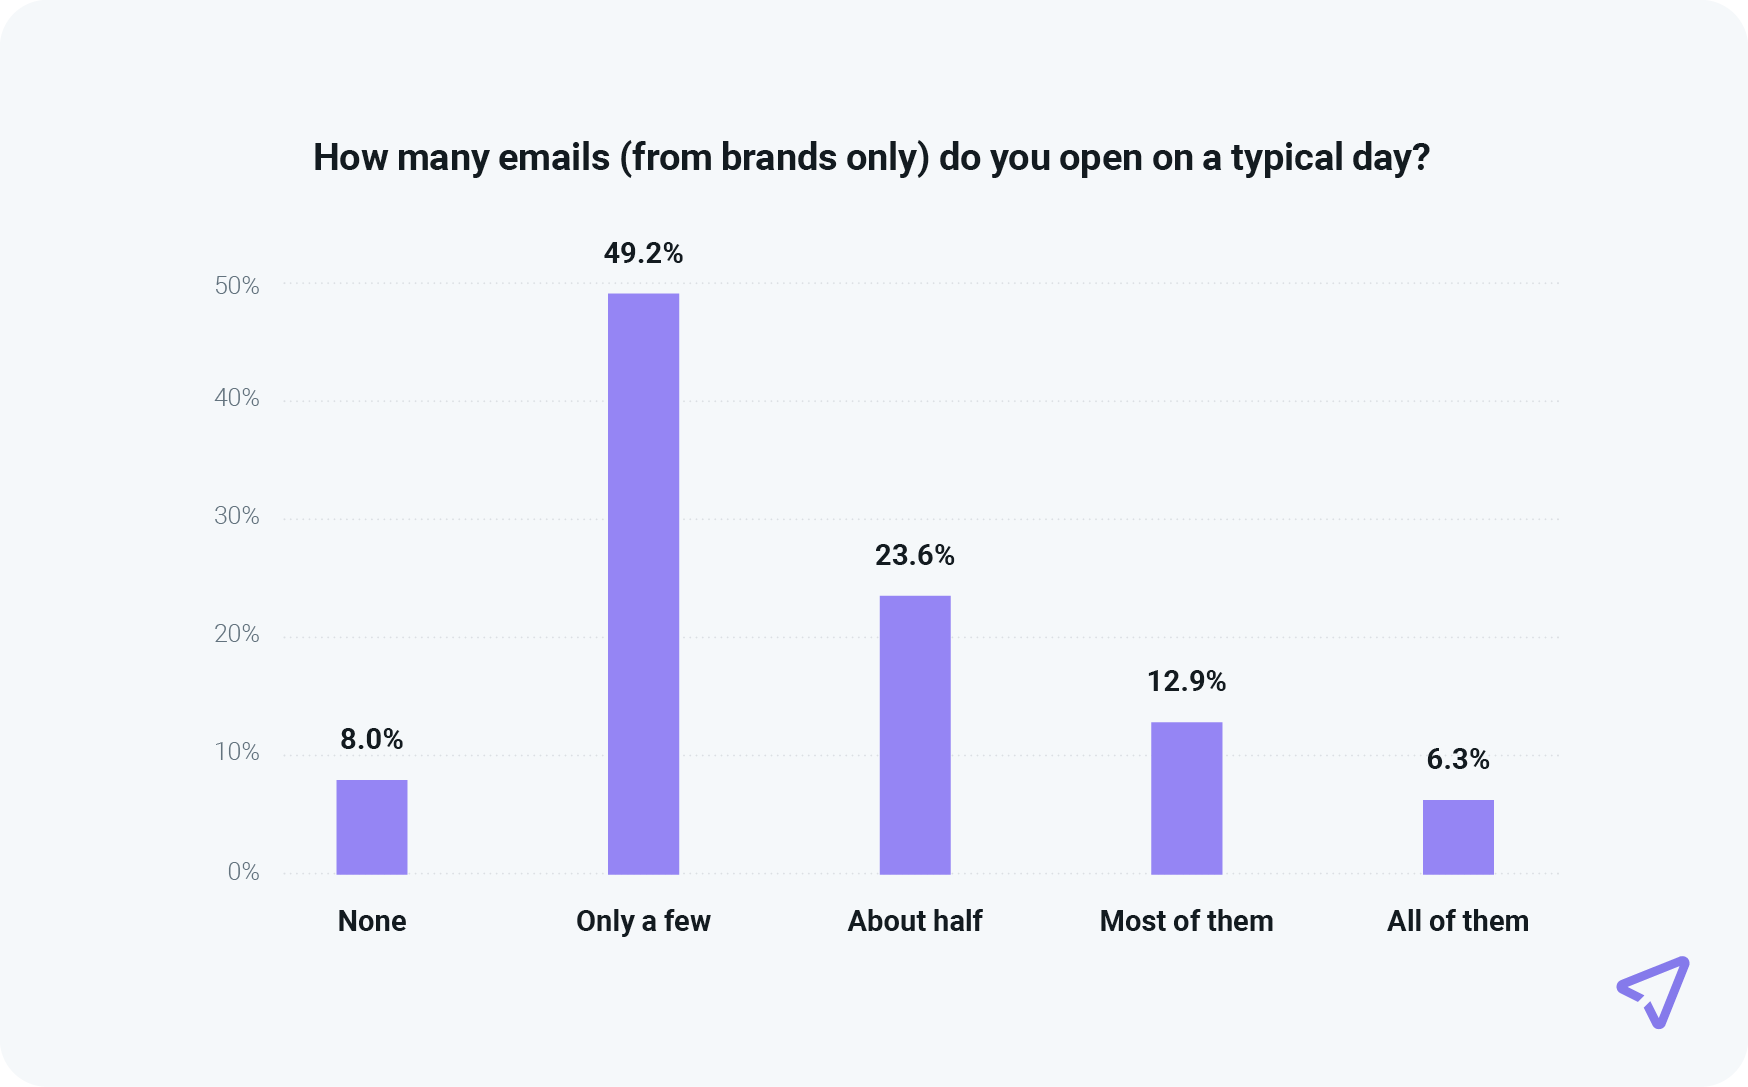 Chart shows 49.2% of consumers open only a few emails from brands per day